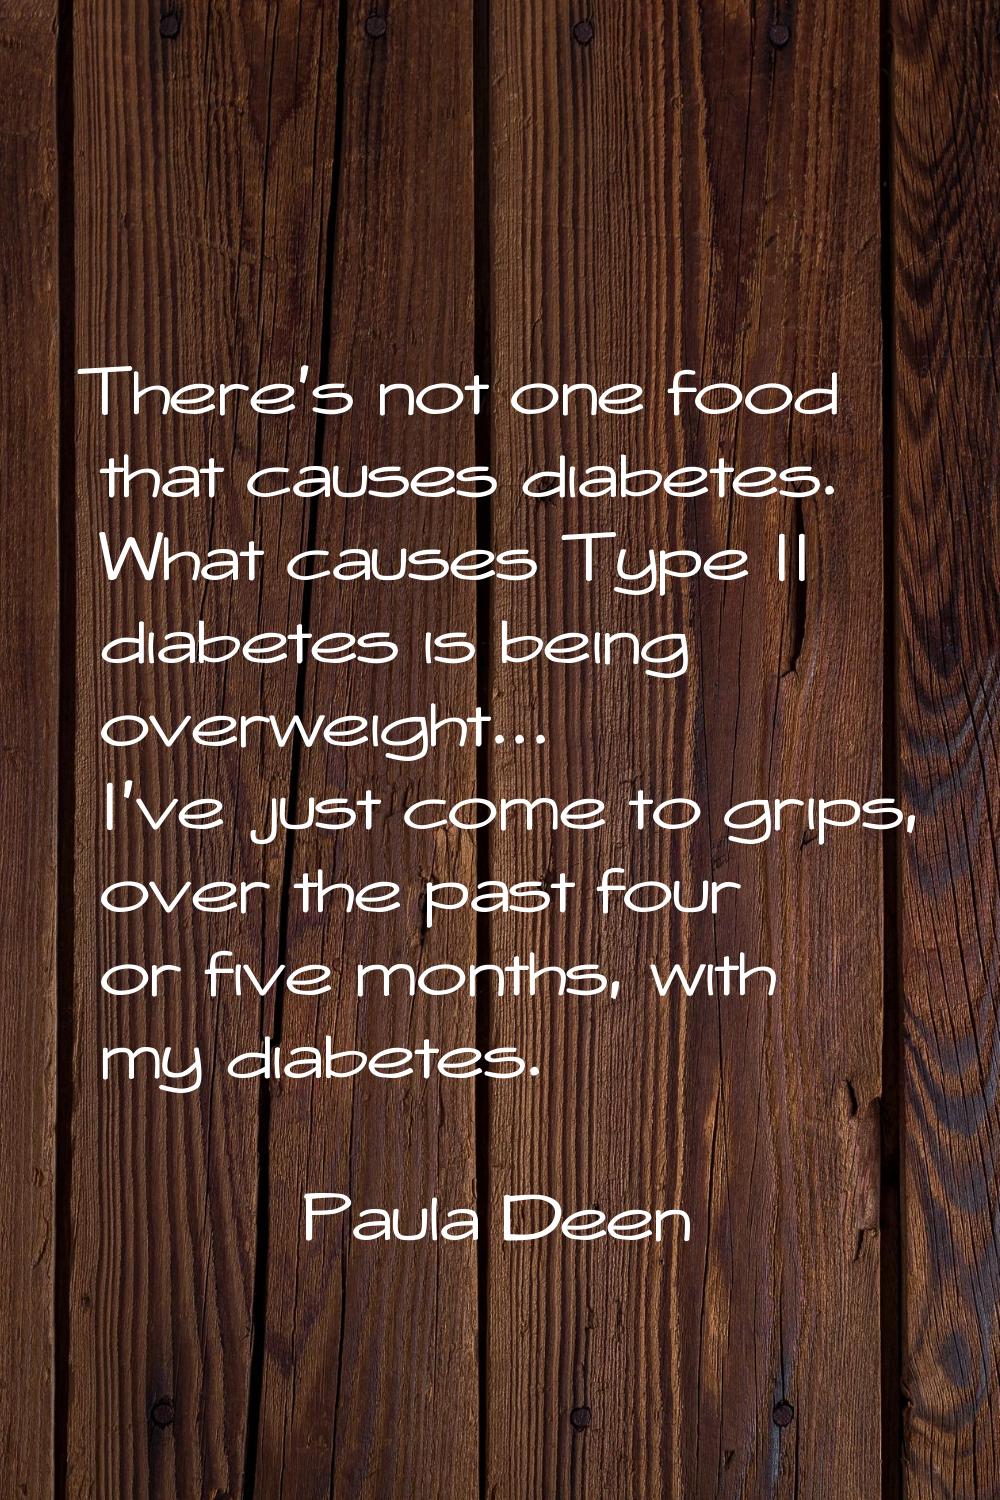 There's not one food that causes diabetes. What causes Type II diabetes is being overweight... I've